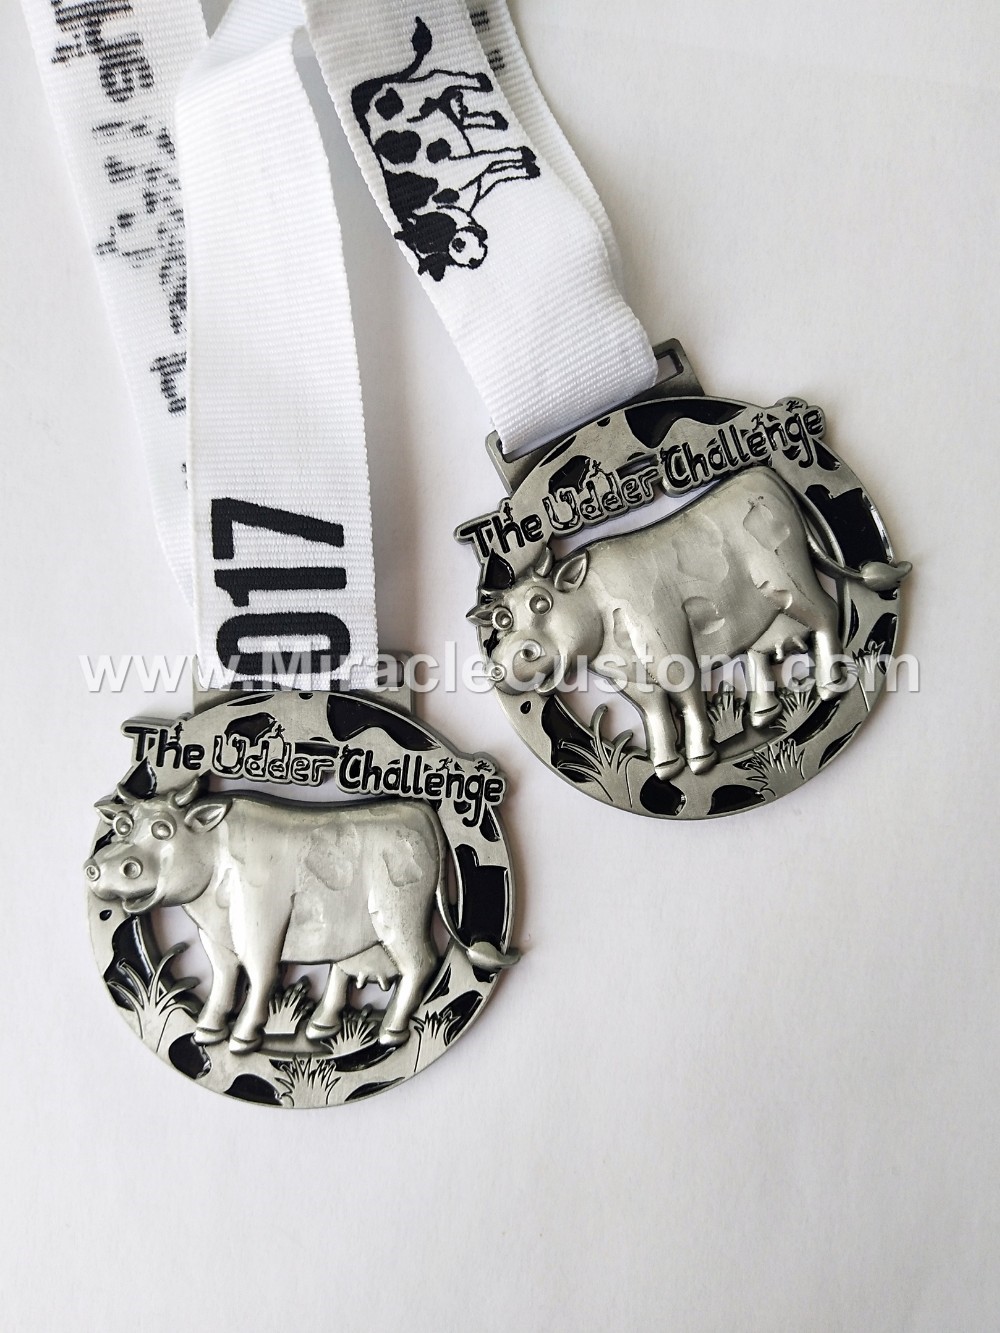 Custom Sports and Awards Medals